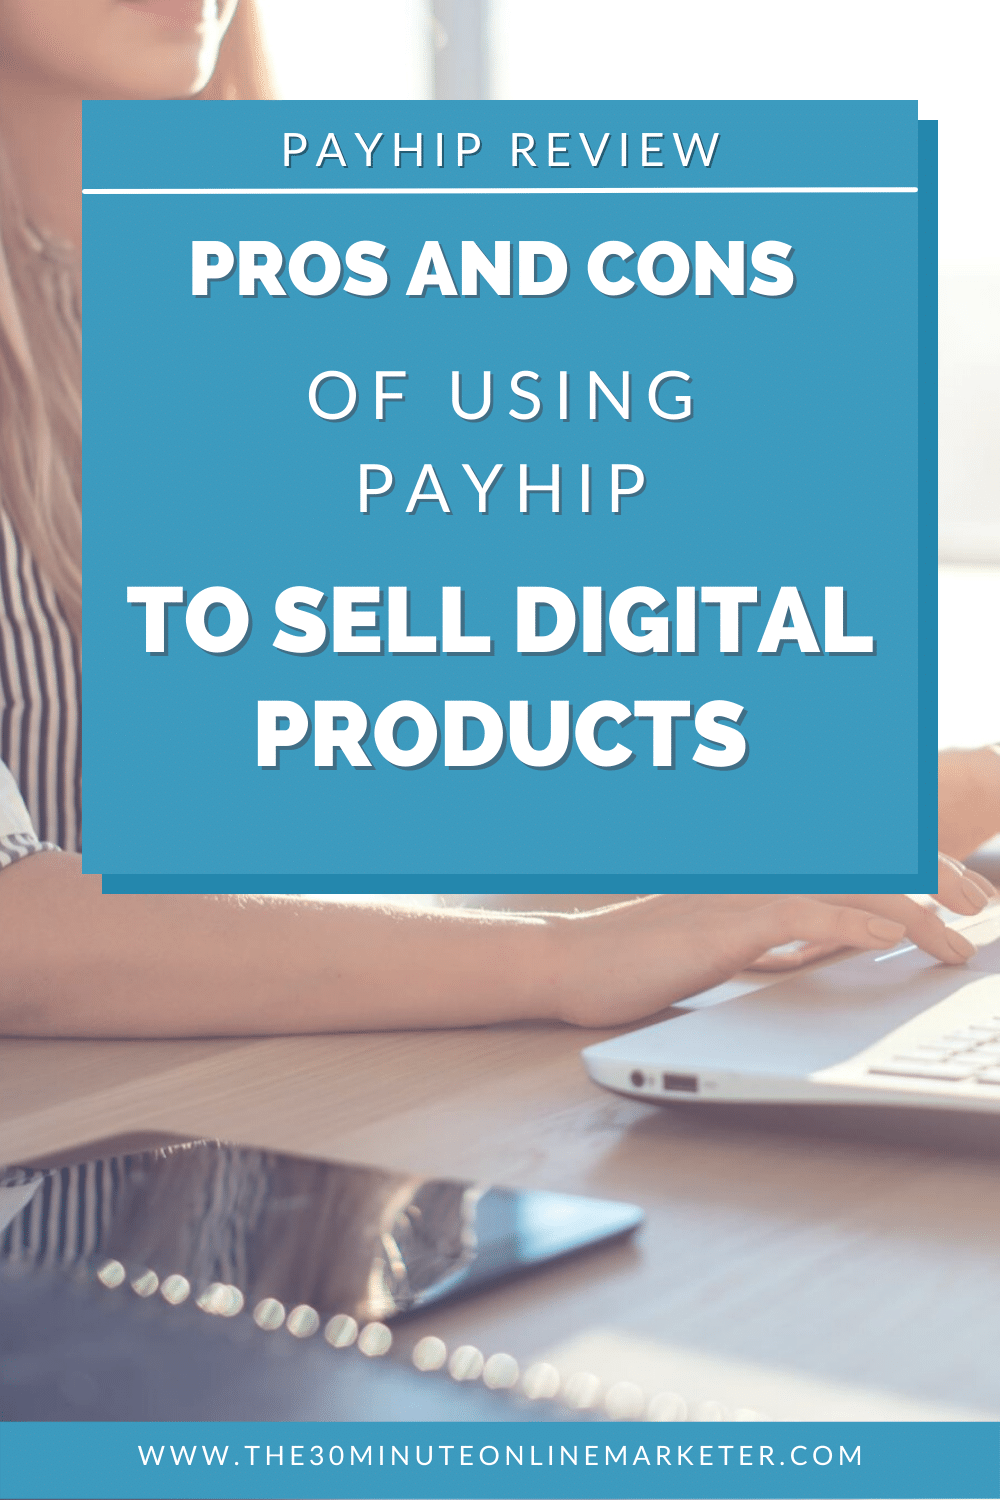 Payhip Review 2021